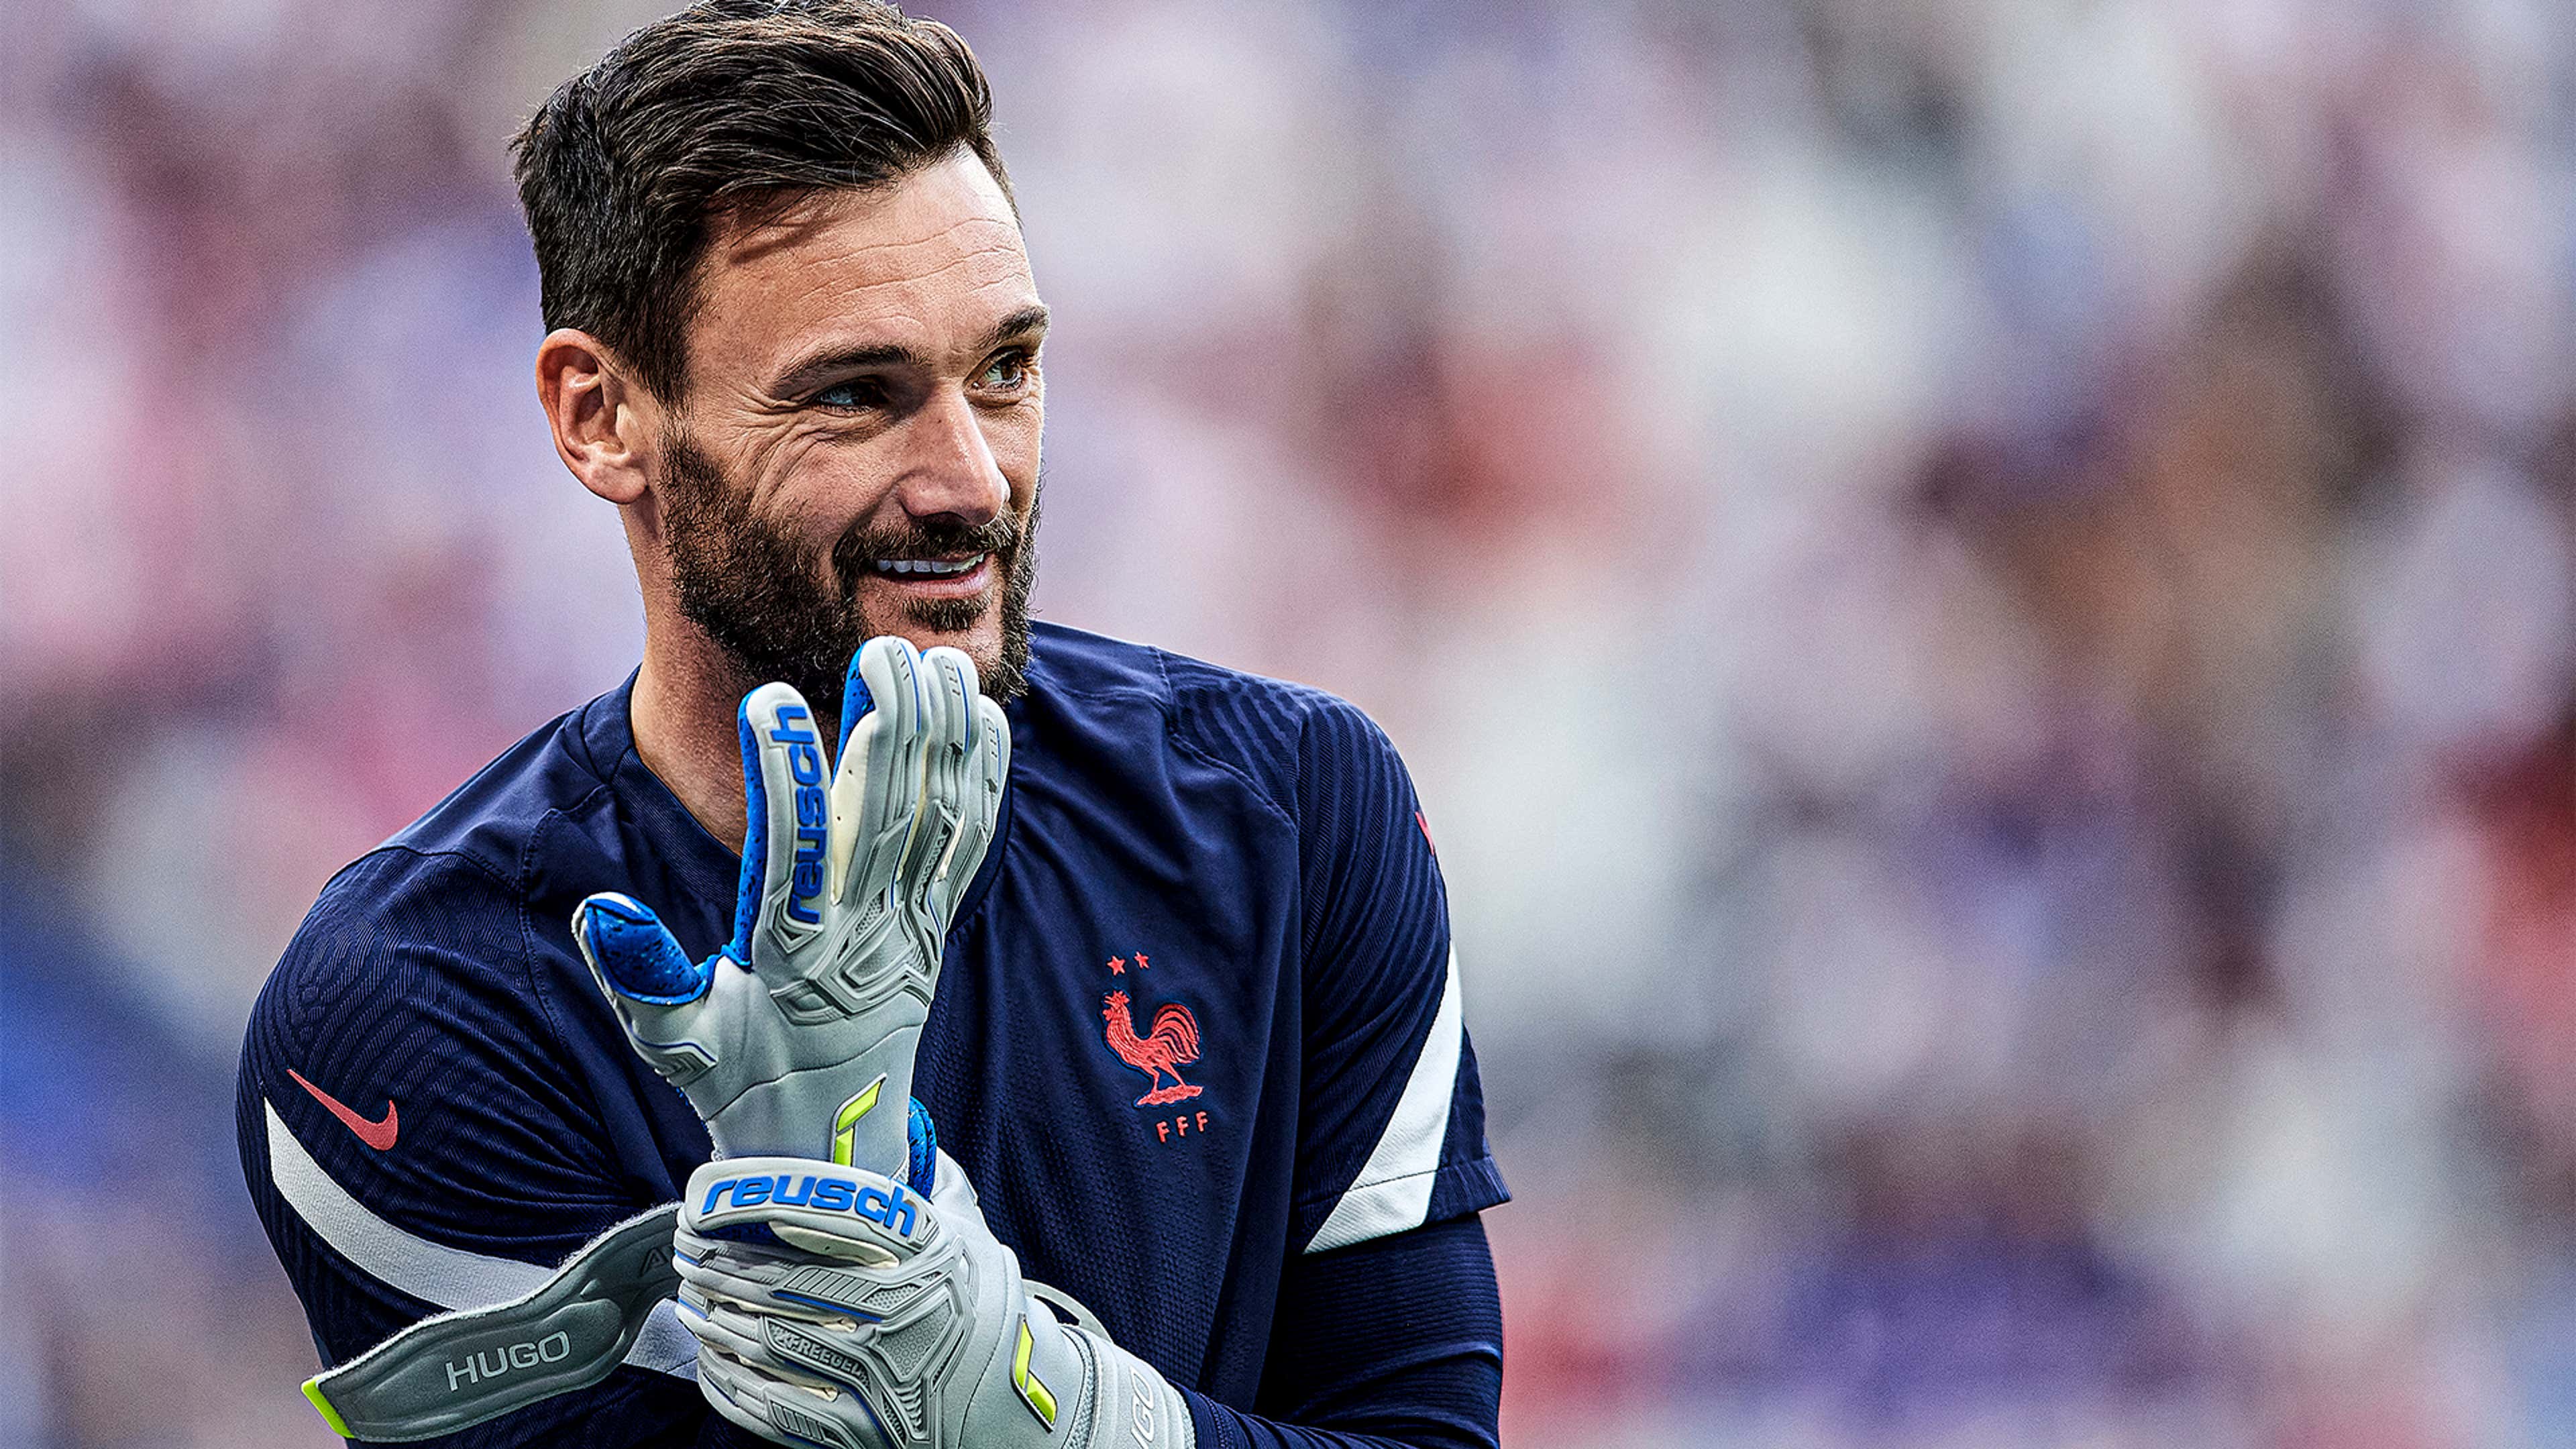 France goalkeeper Hugo Lloris: World Cup loss will help youngsters, Football